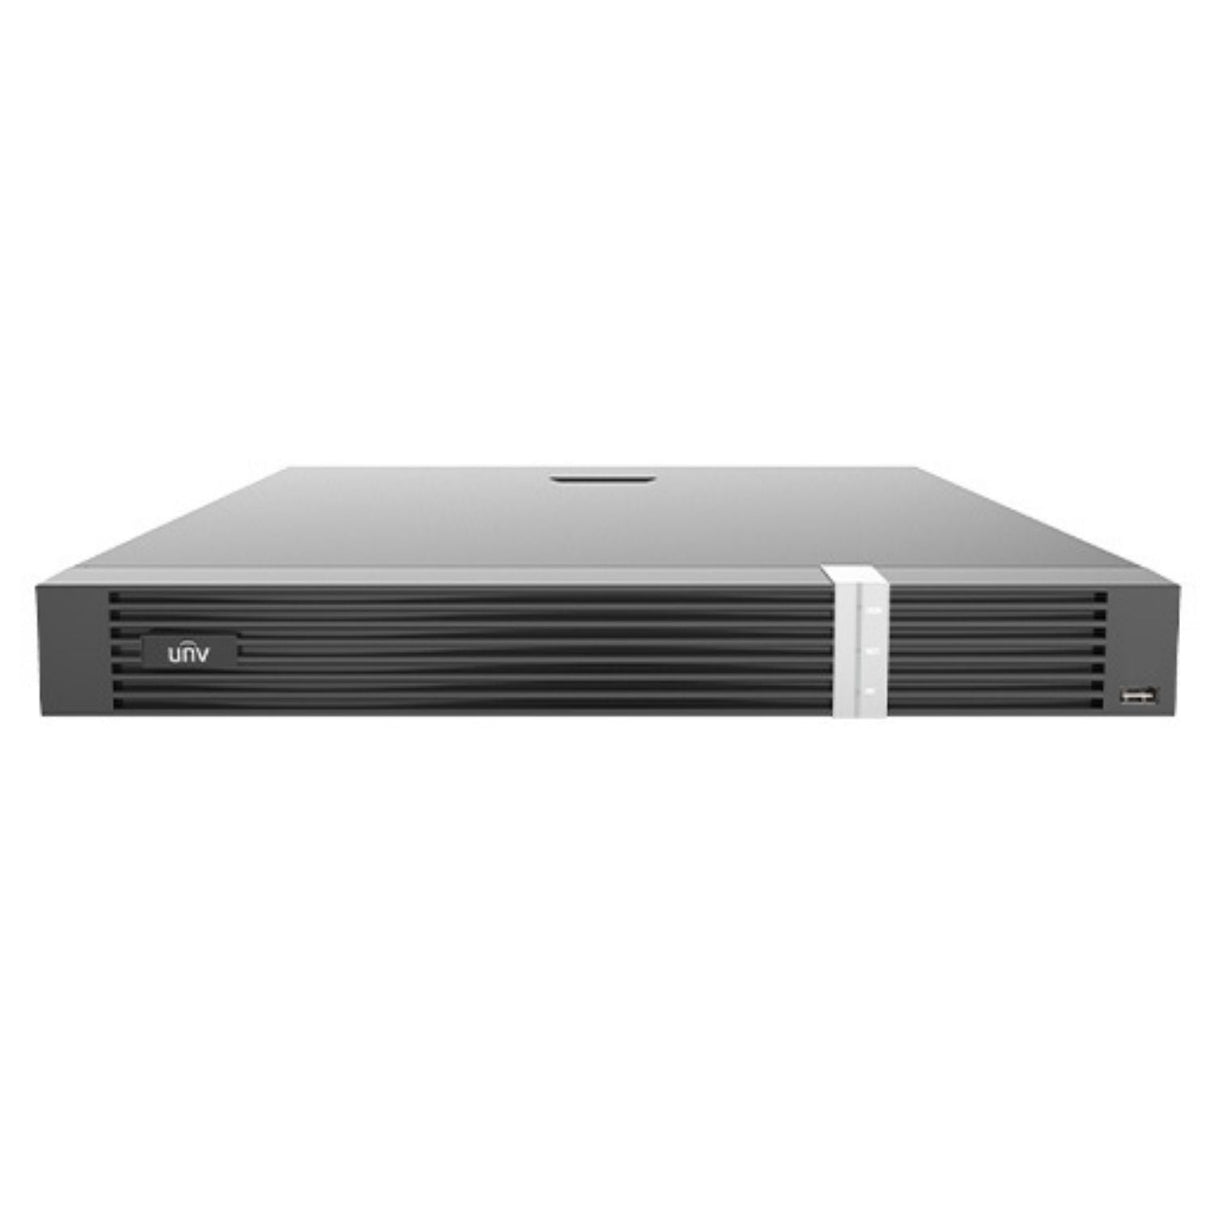 Uniview 16CH Network Video Recorder: upto 12MP, 160MBPS INPUT, 2-SATA HDD, Prime Series - NVR302-16E2-P16-IQ